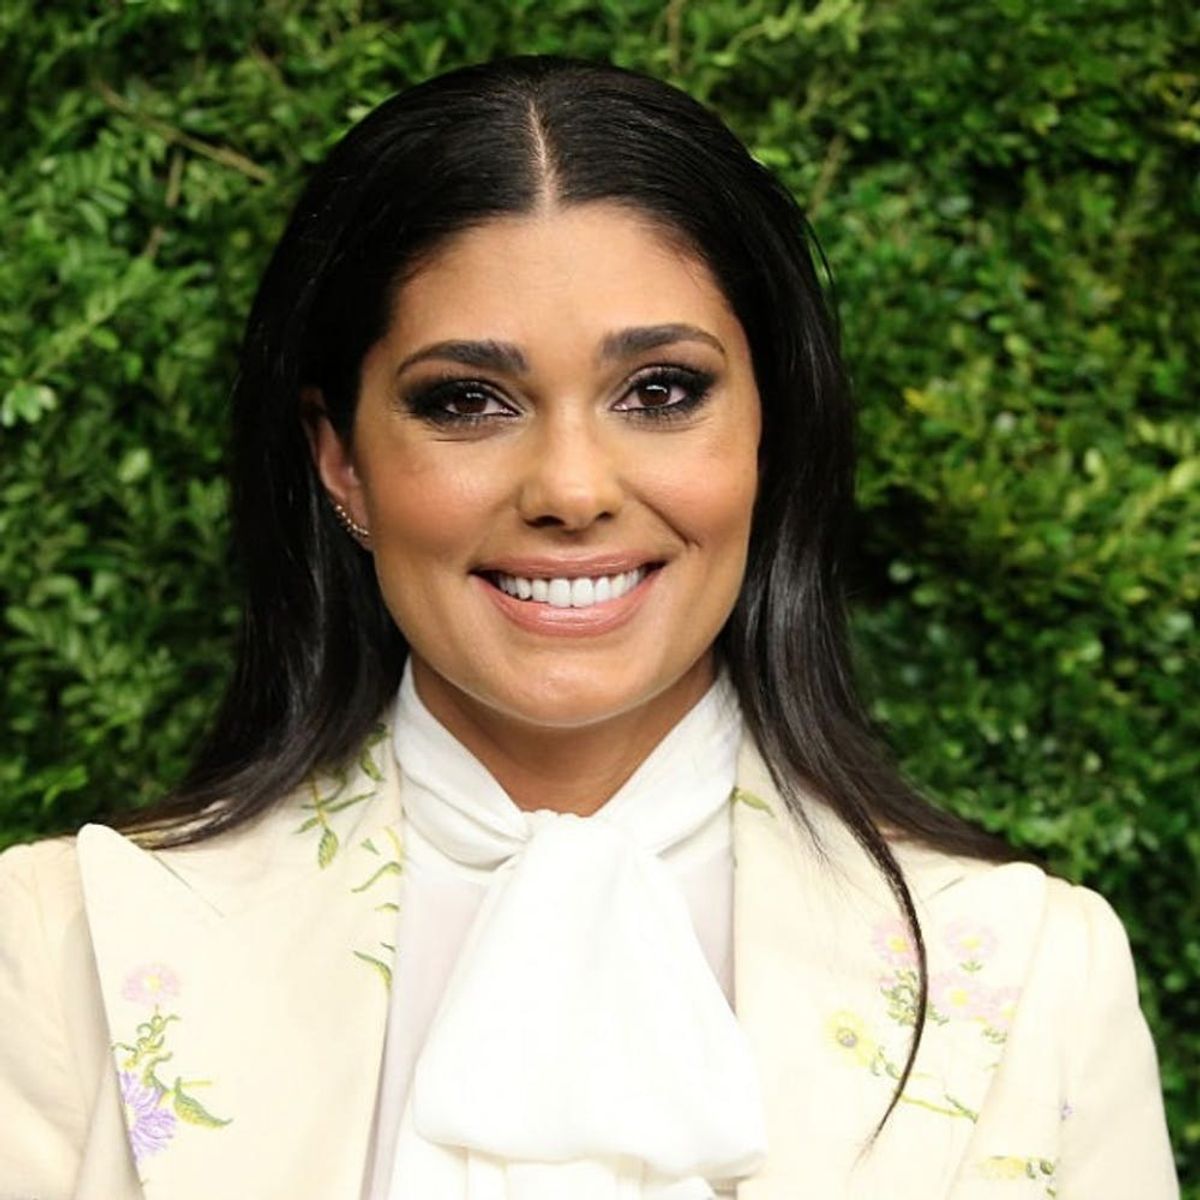 Rachael Ray Sent Rachel Roy the Best Gift After #BeckyGate